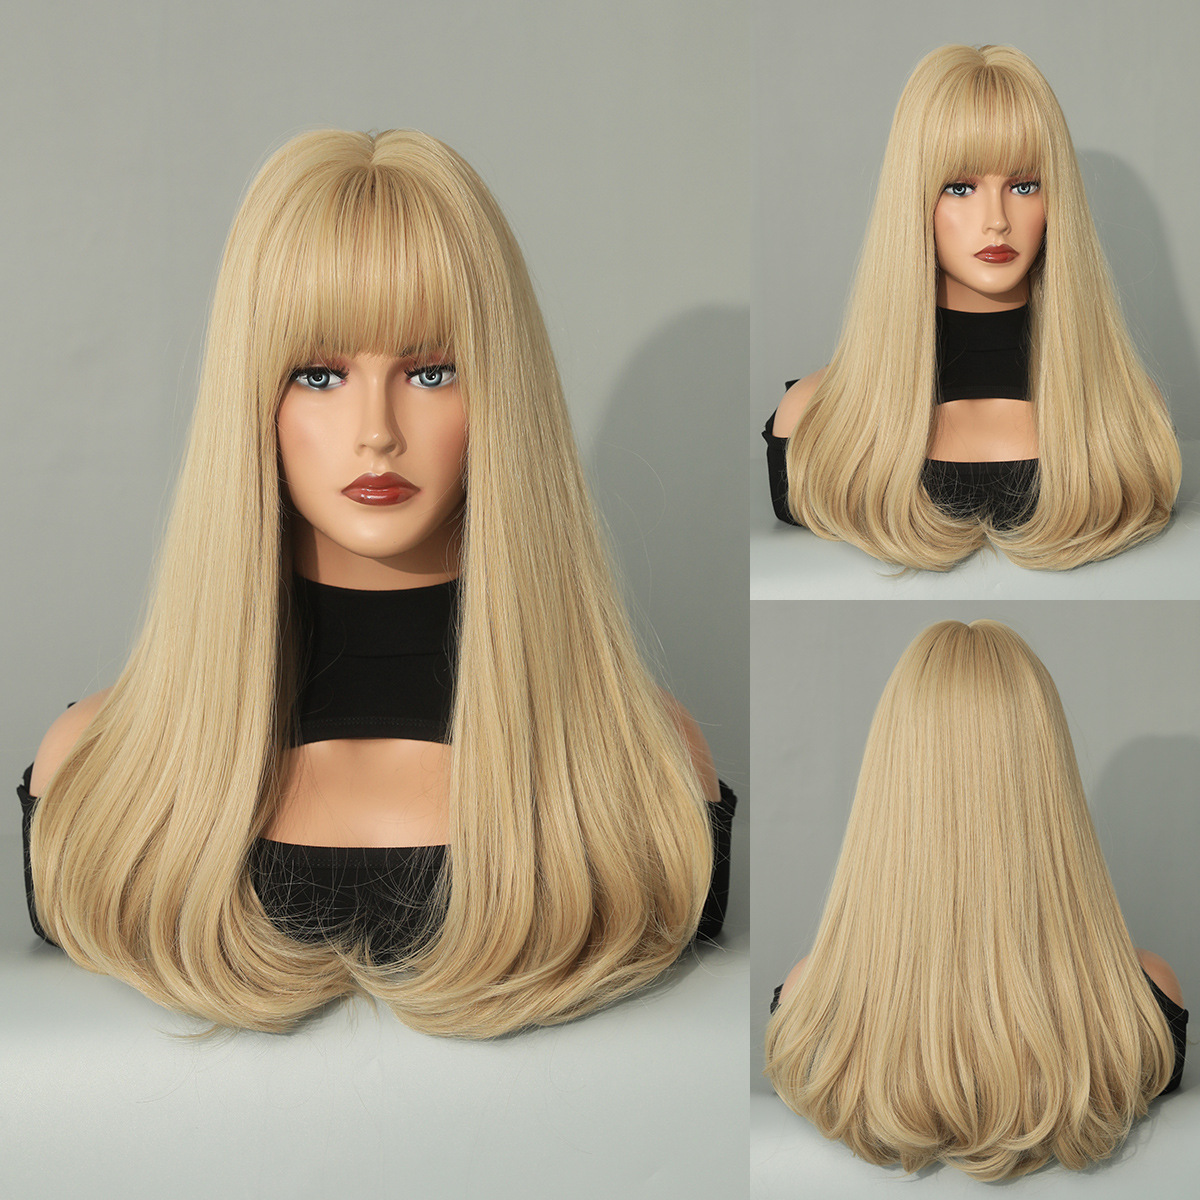 A synthetic wig set for women featuring a fashionable platinum blonde long curly wig, ideal for daily wear or Christmas occasions